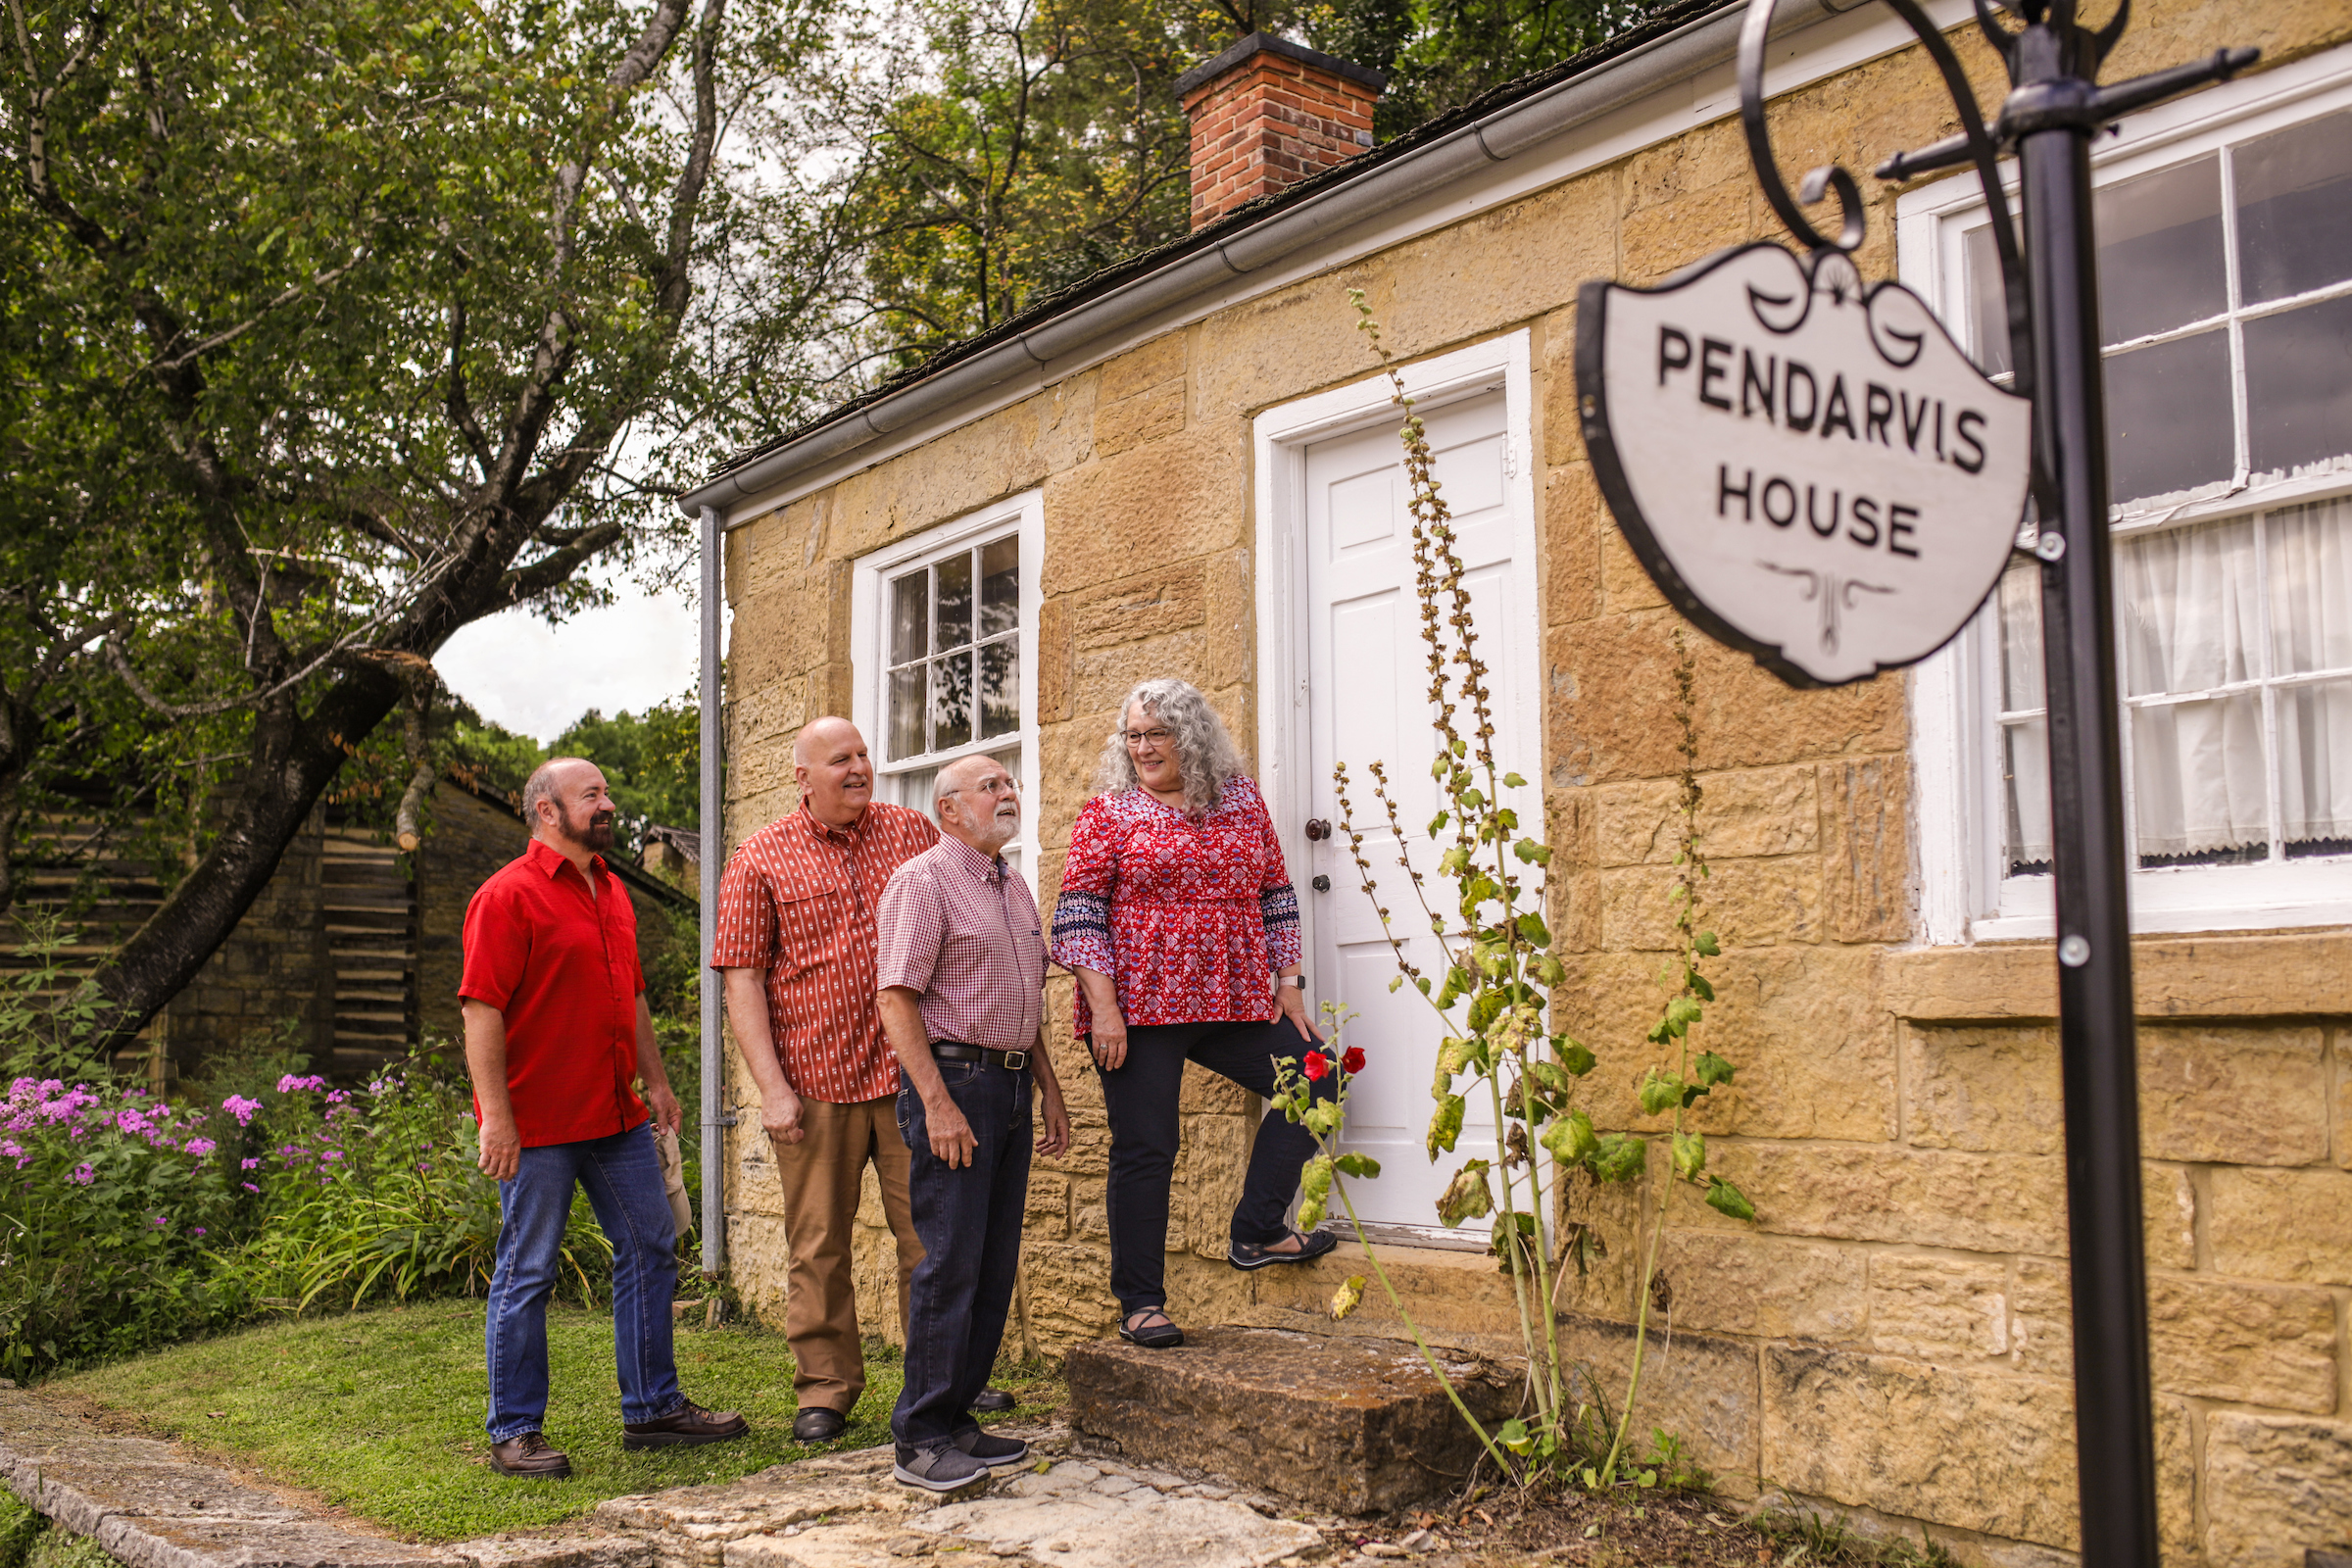 Four people in front of an old-fashioned house with a sign that says "PENDARVIS HOUSE"